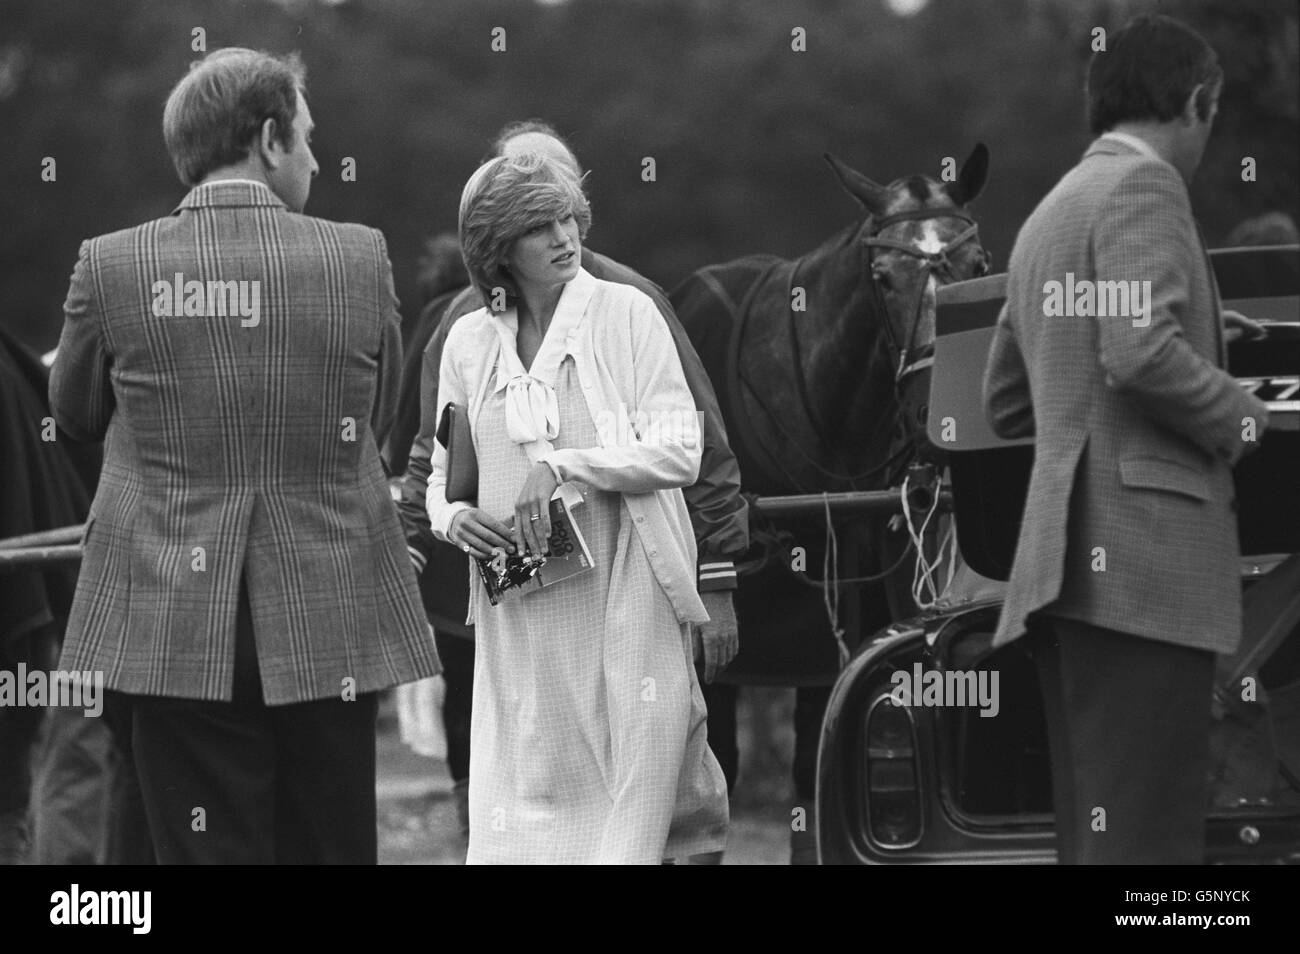 The Princess of Wales, who expects her first child within a few weeks, is pictured at Windsor Great Park, where Prince Charles is taking part in a polo match for the Claude Pert Cup. *Low res scan - hi res version available on request* Stock Photo